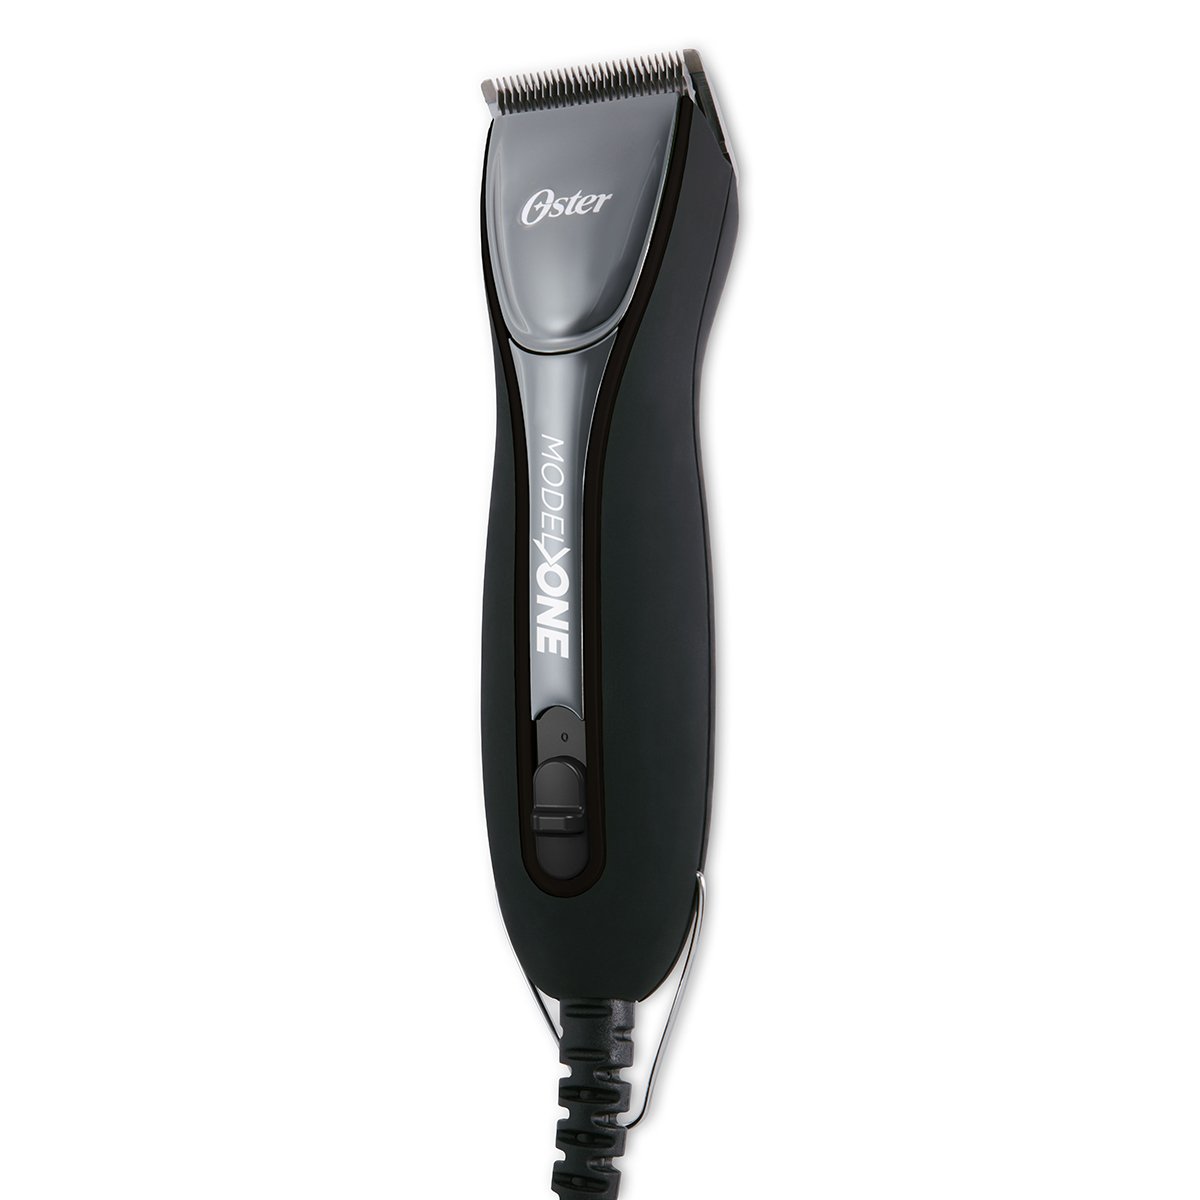 Oster Model One Clipper 76175-010 - High Performance Motor - Includes detachable 000 blade